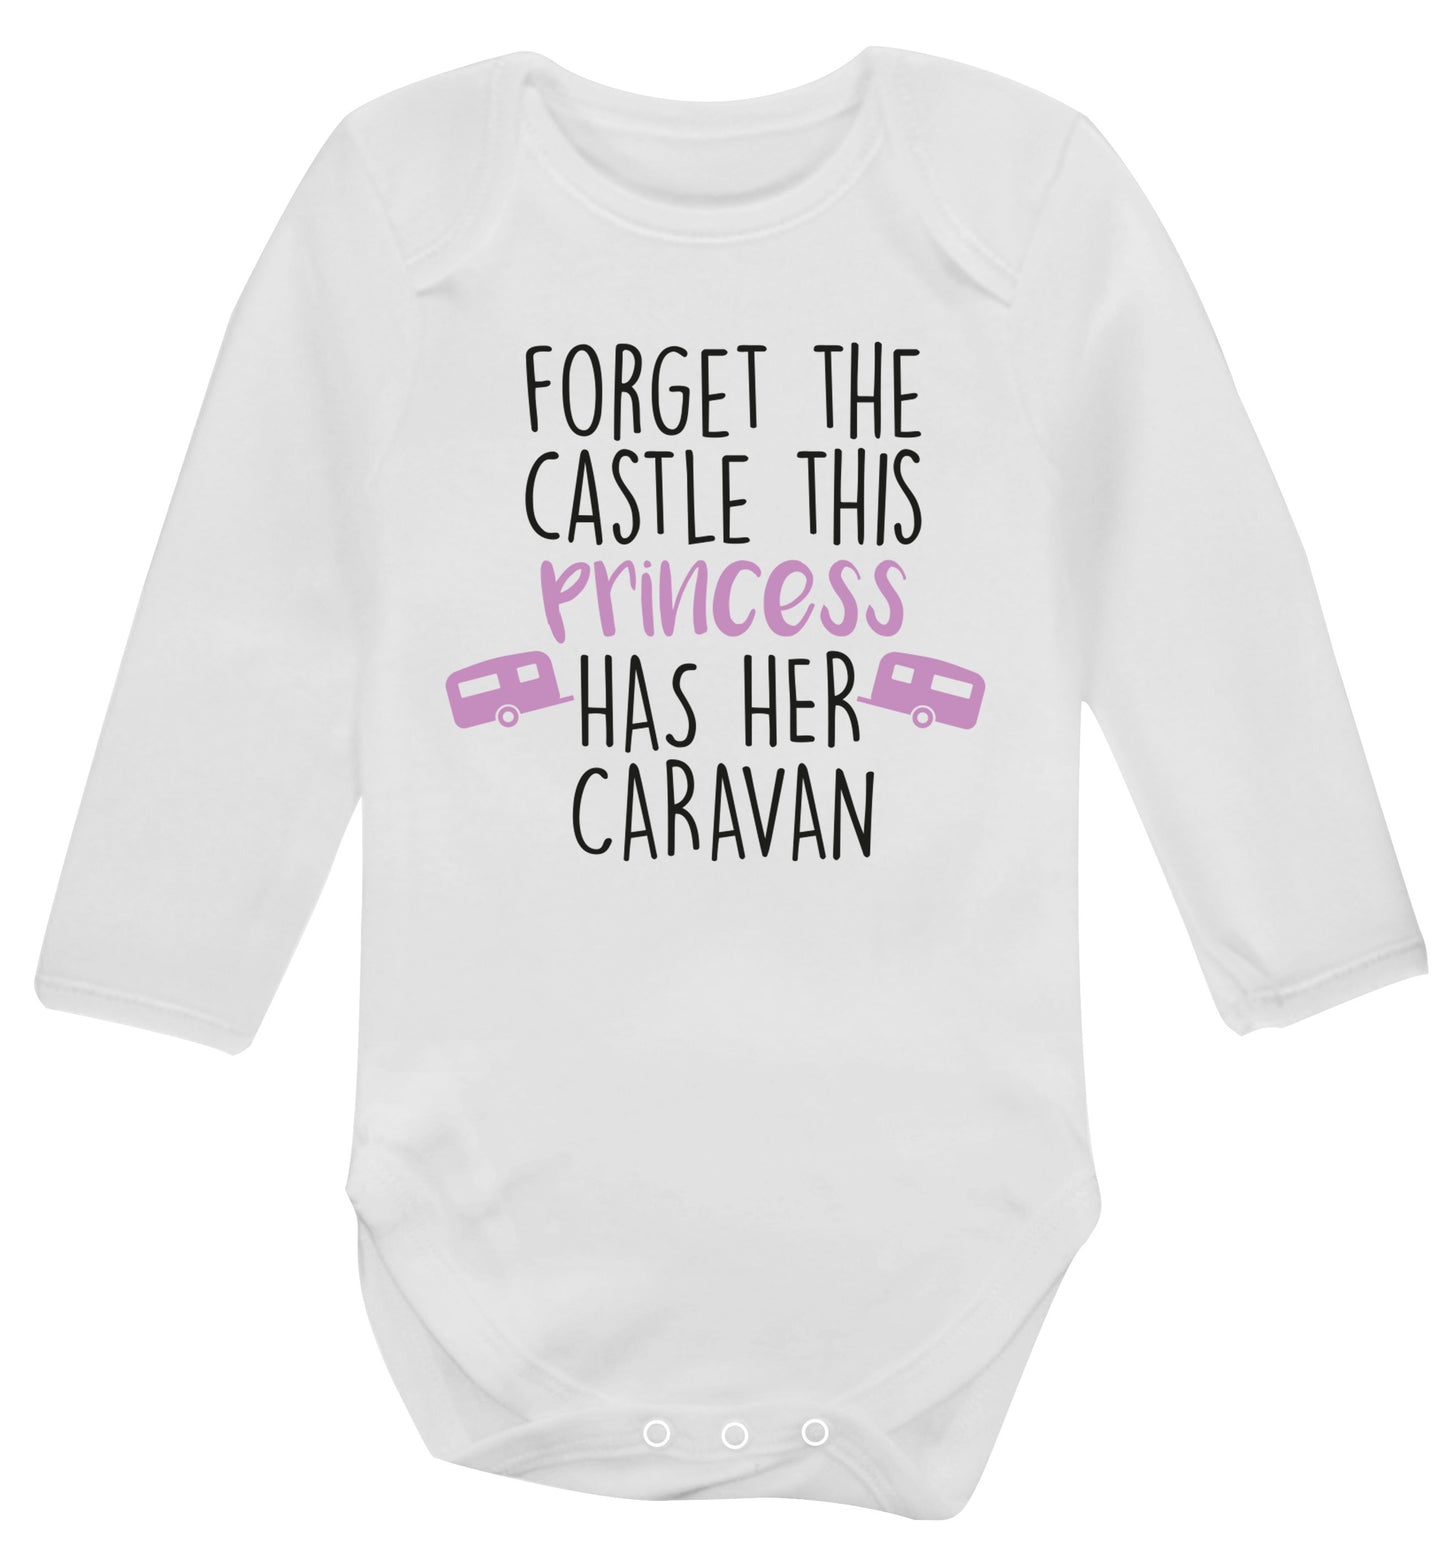 Forget the castle this princess lives at the caravan Baby Vest long sleeved white 6-12 months